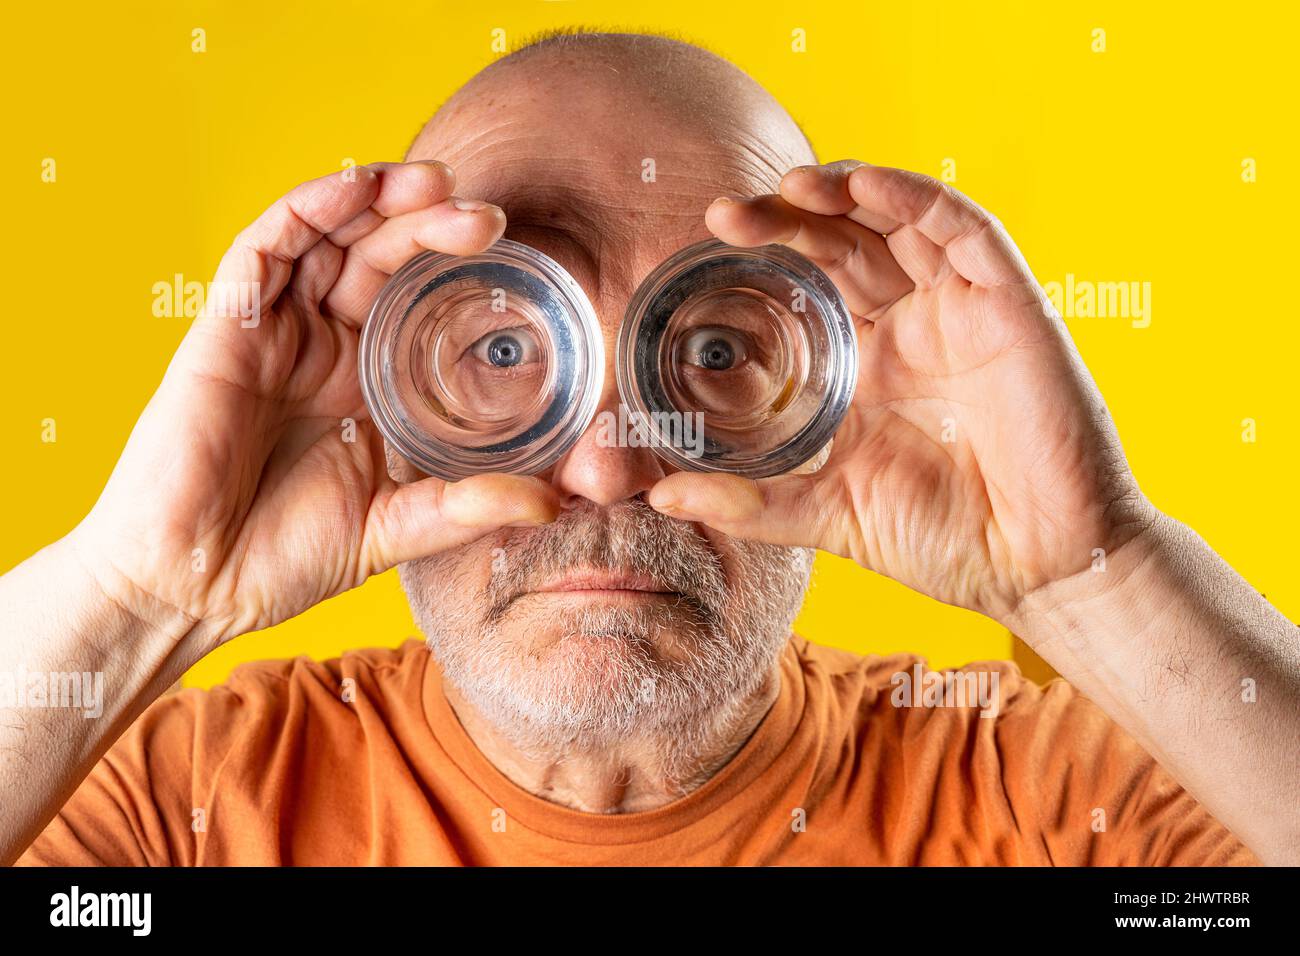 A man looking through the bottoms of glasses like binoculars Stock Photo